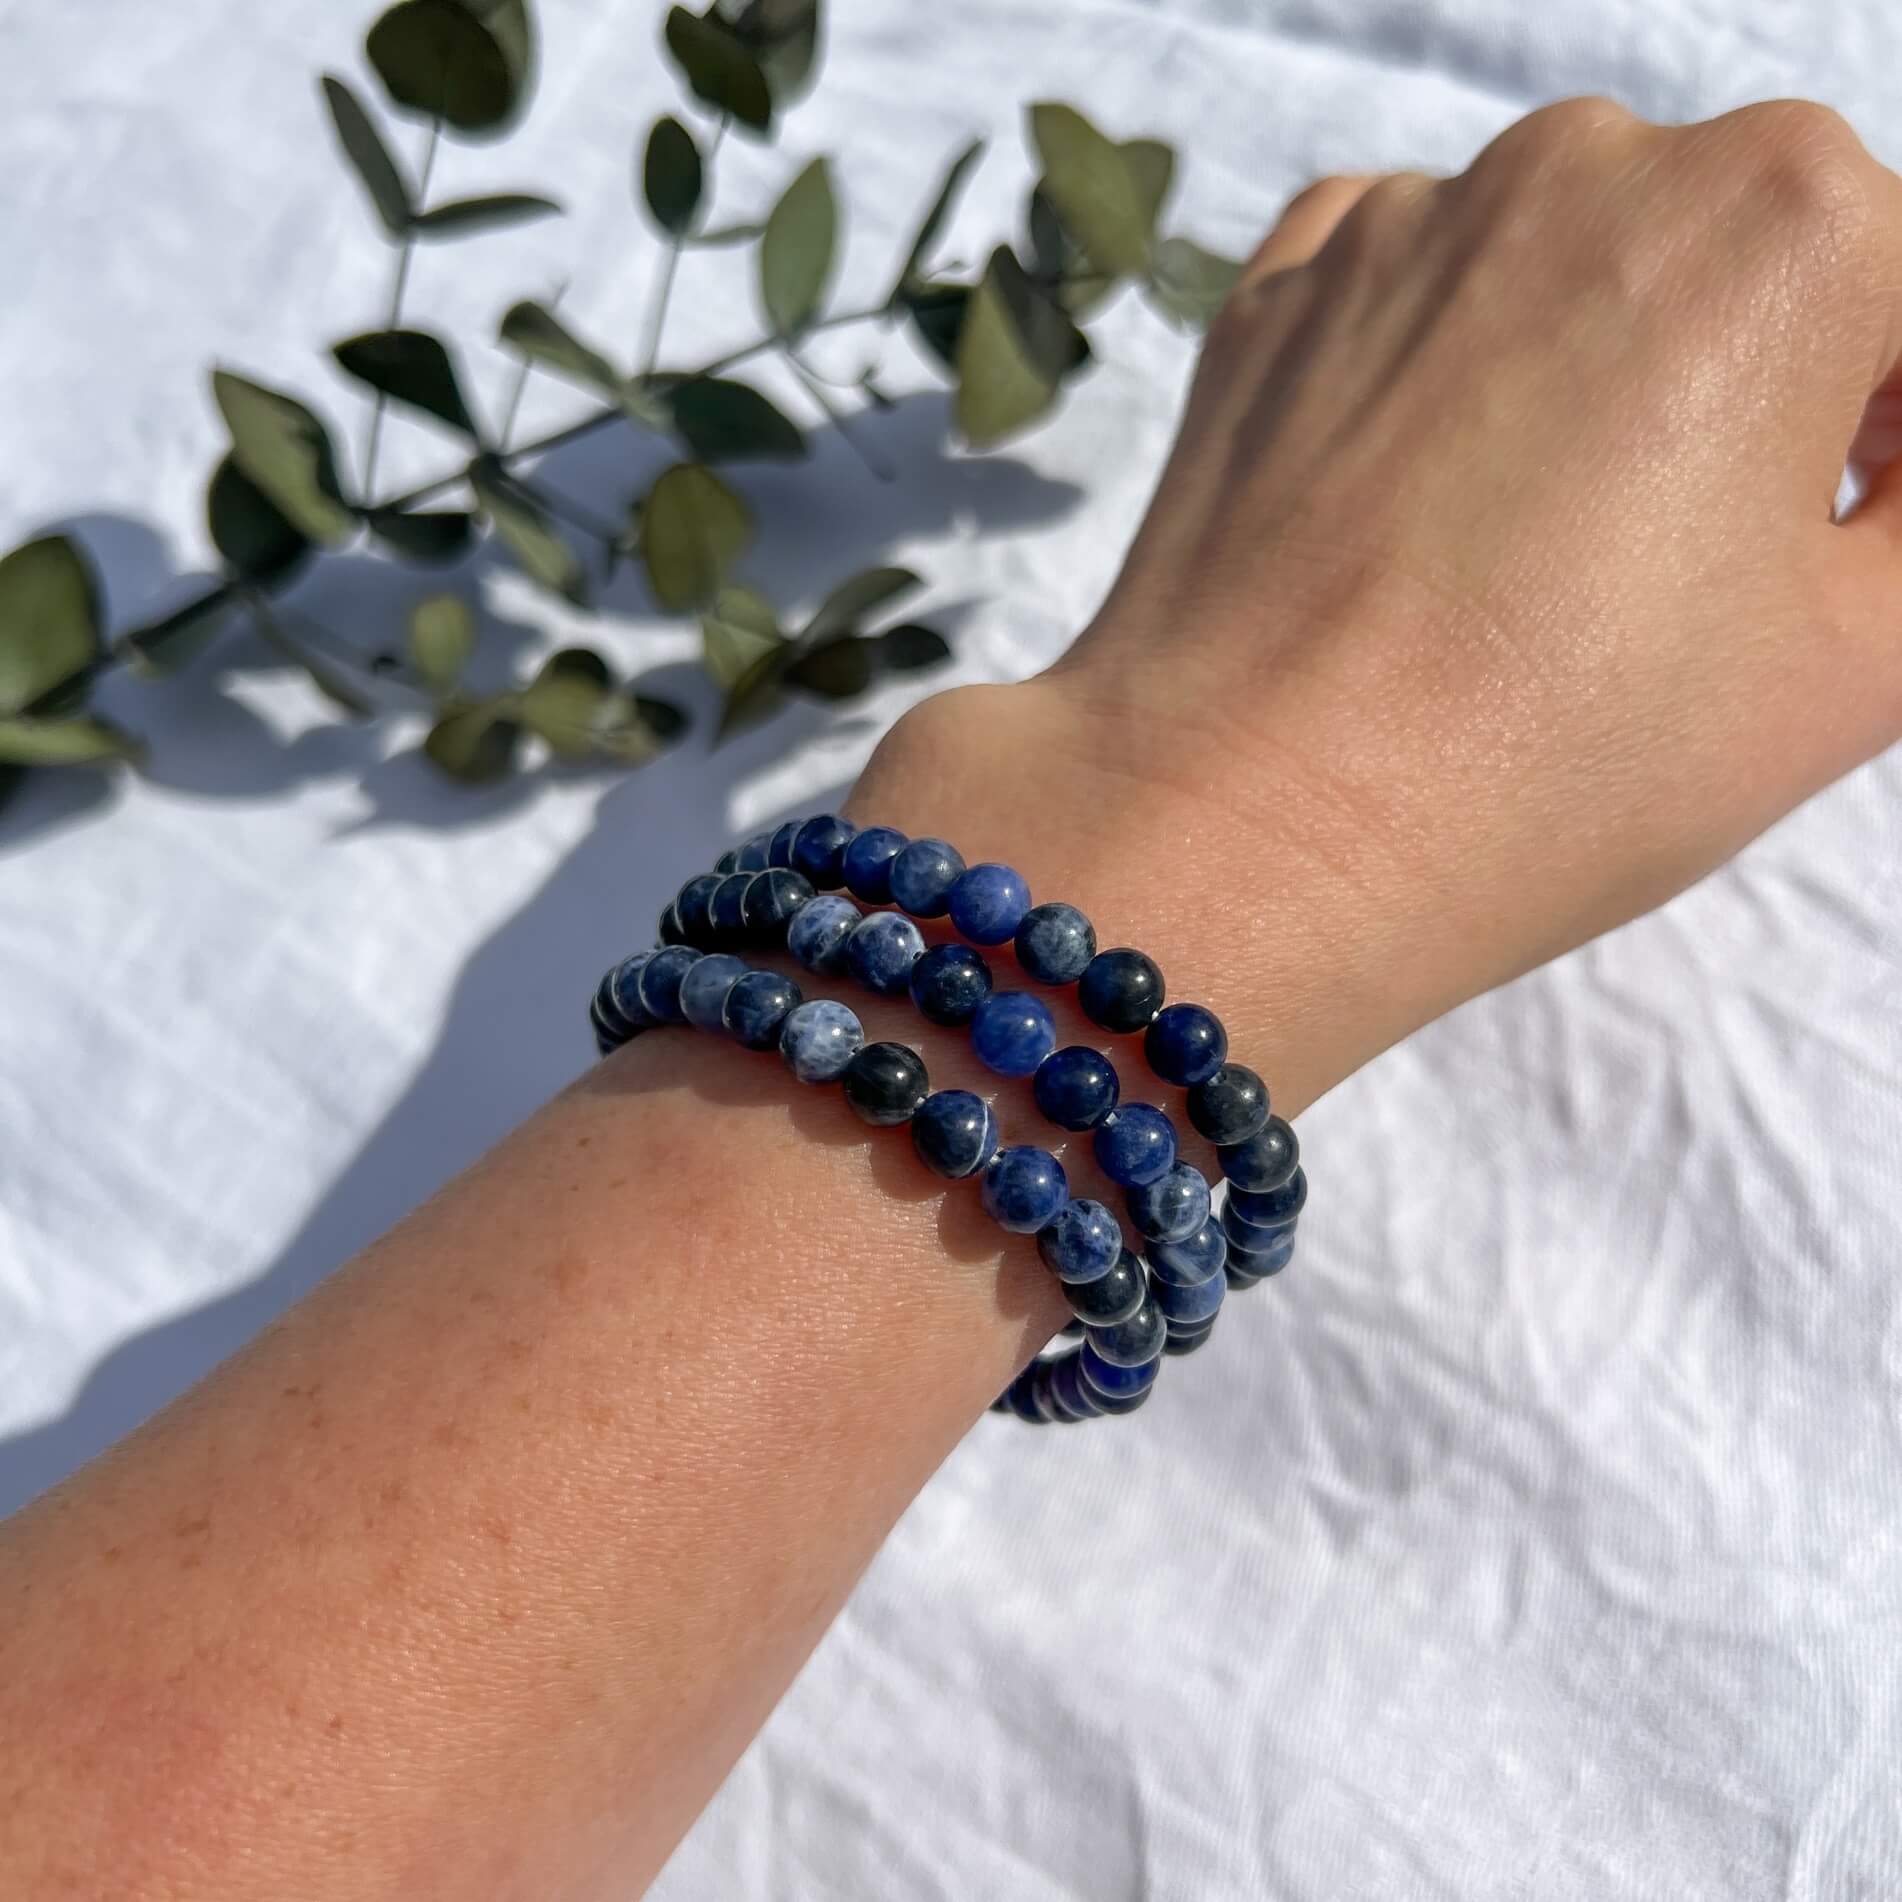 A ladies arm wearing Three blue and white patterned Sodalite crystal bead bracelets